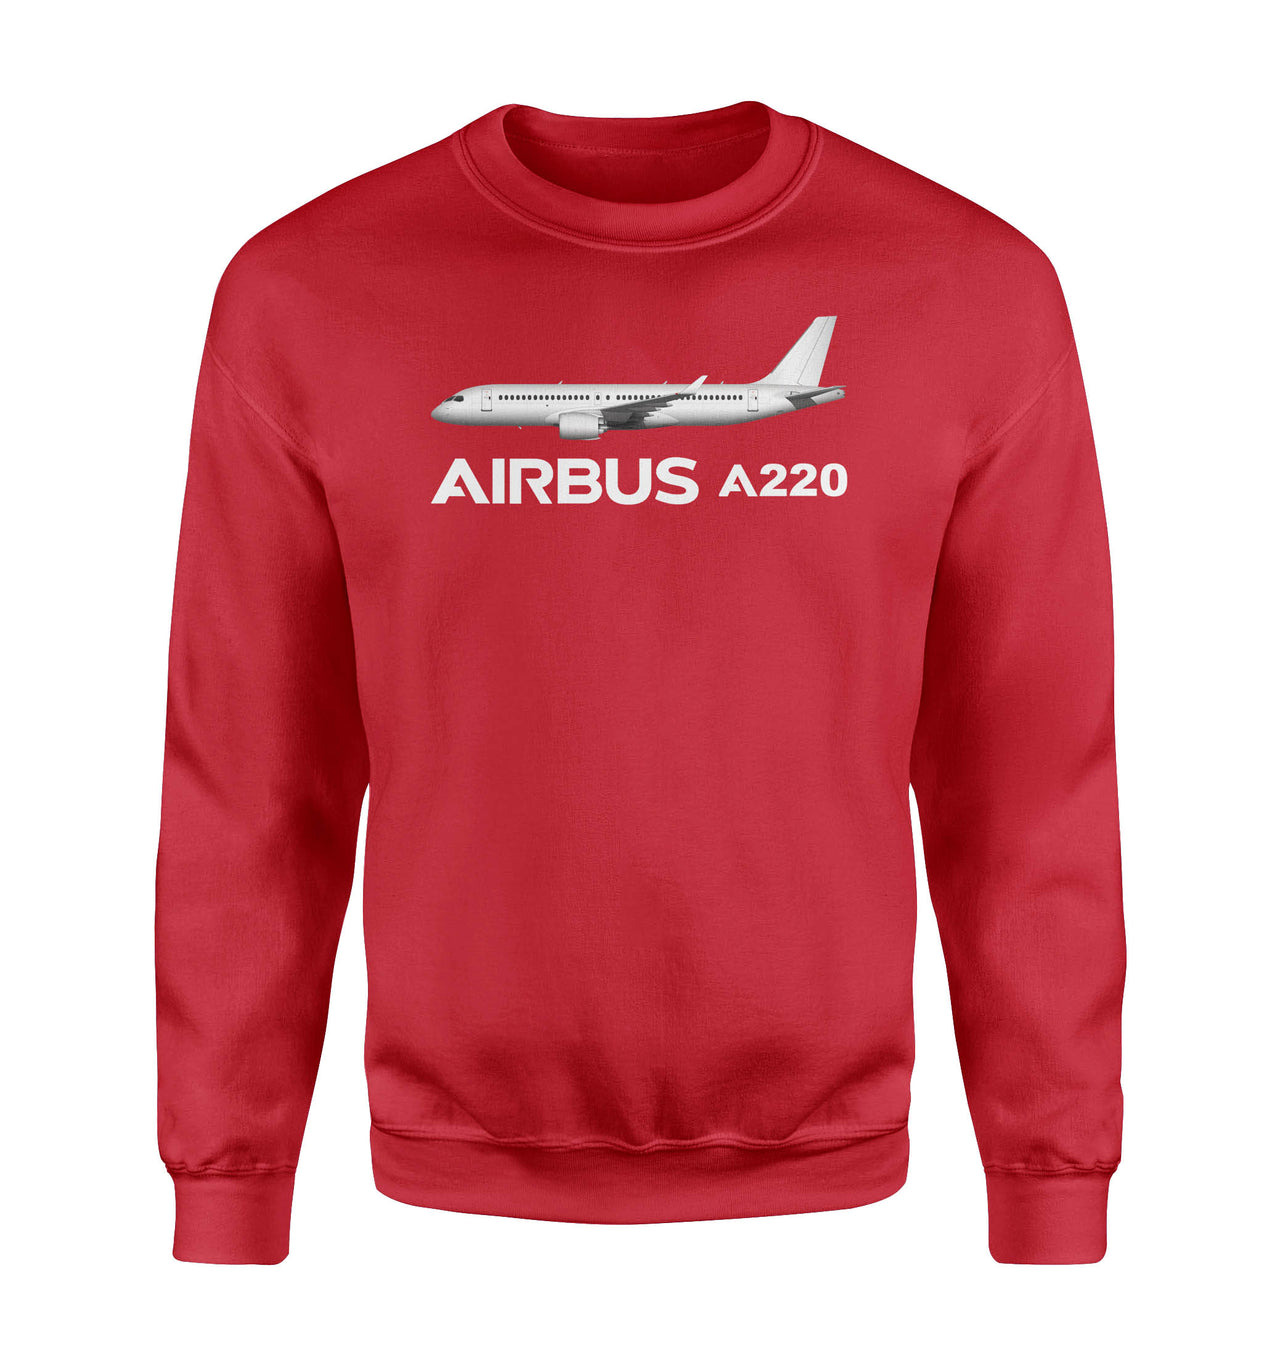 The Airbus A220 Designed Sweatshirts